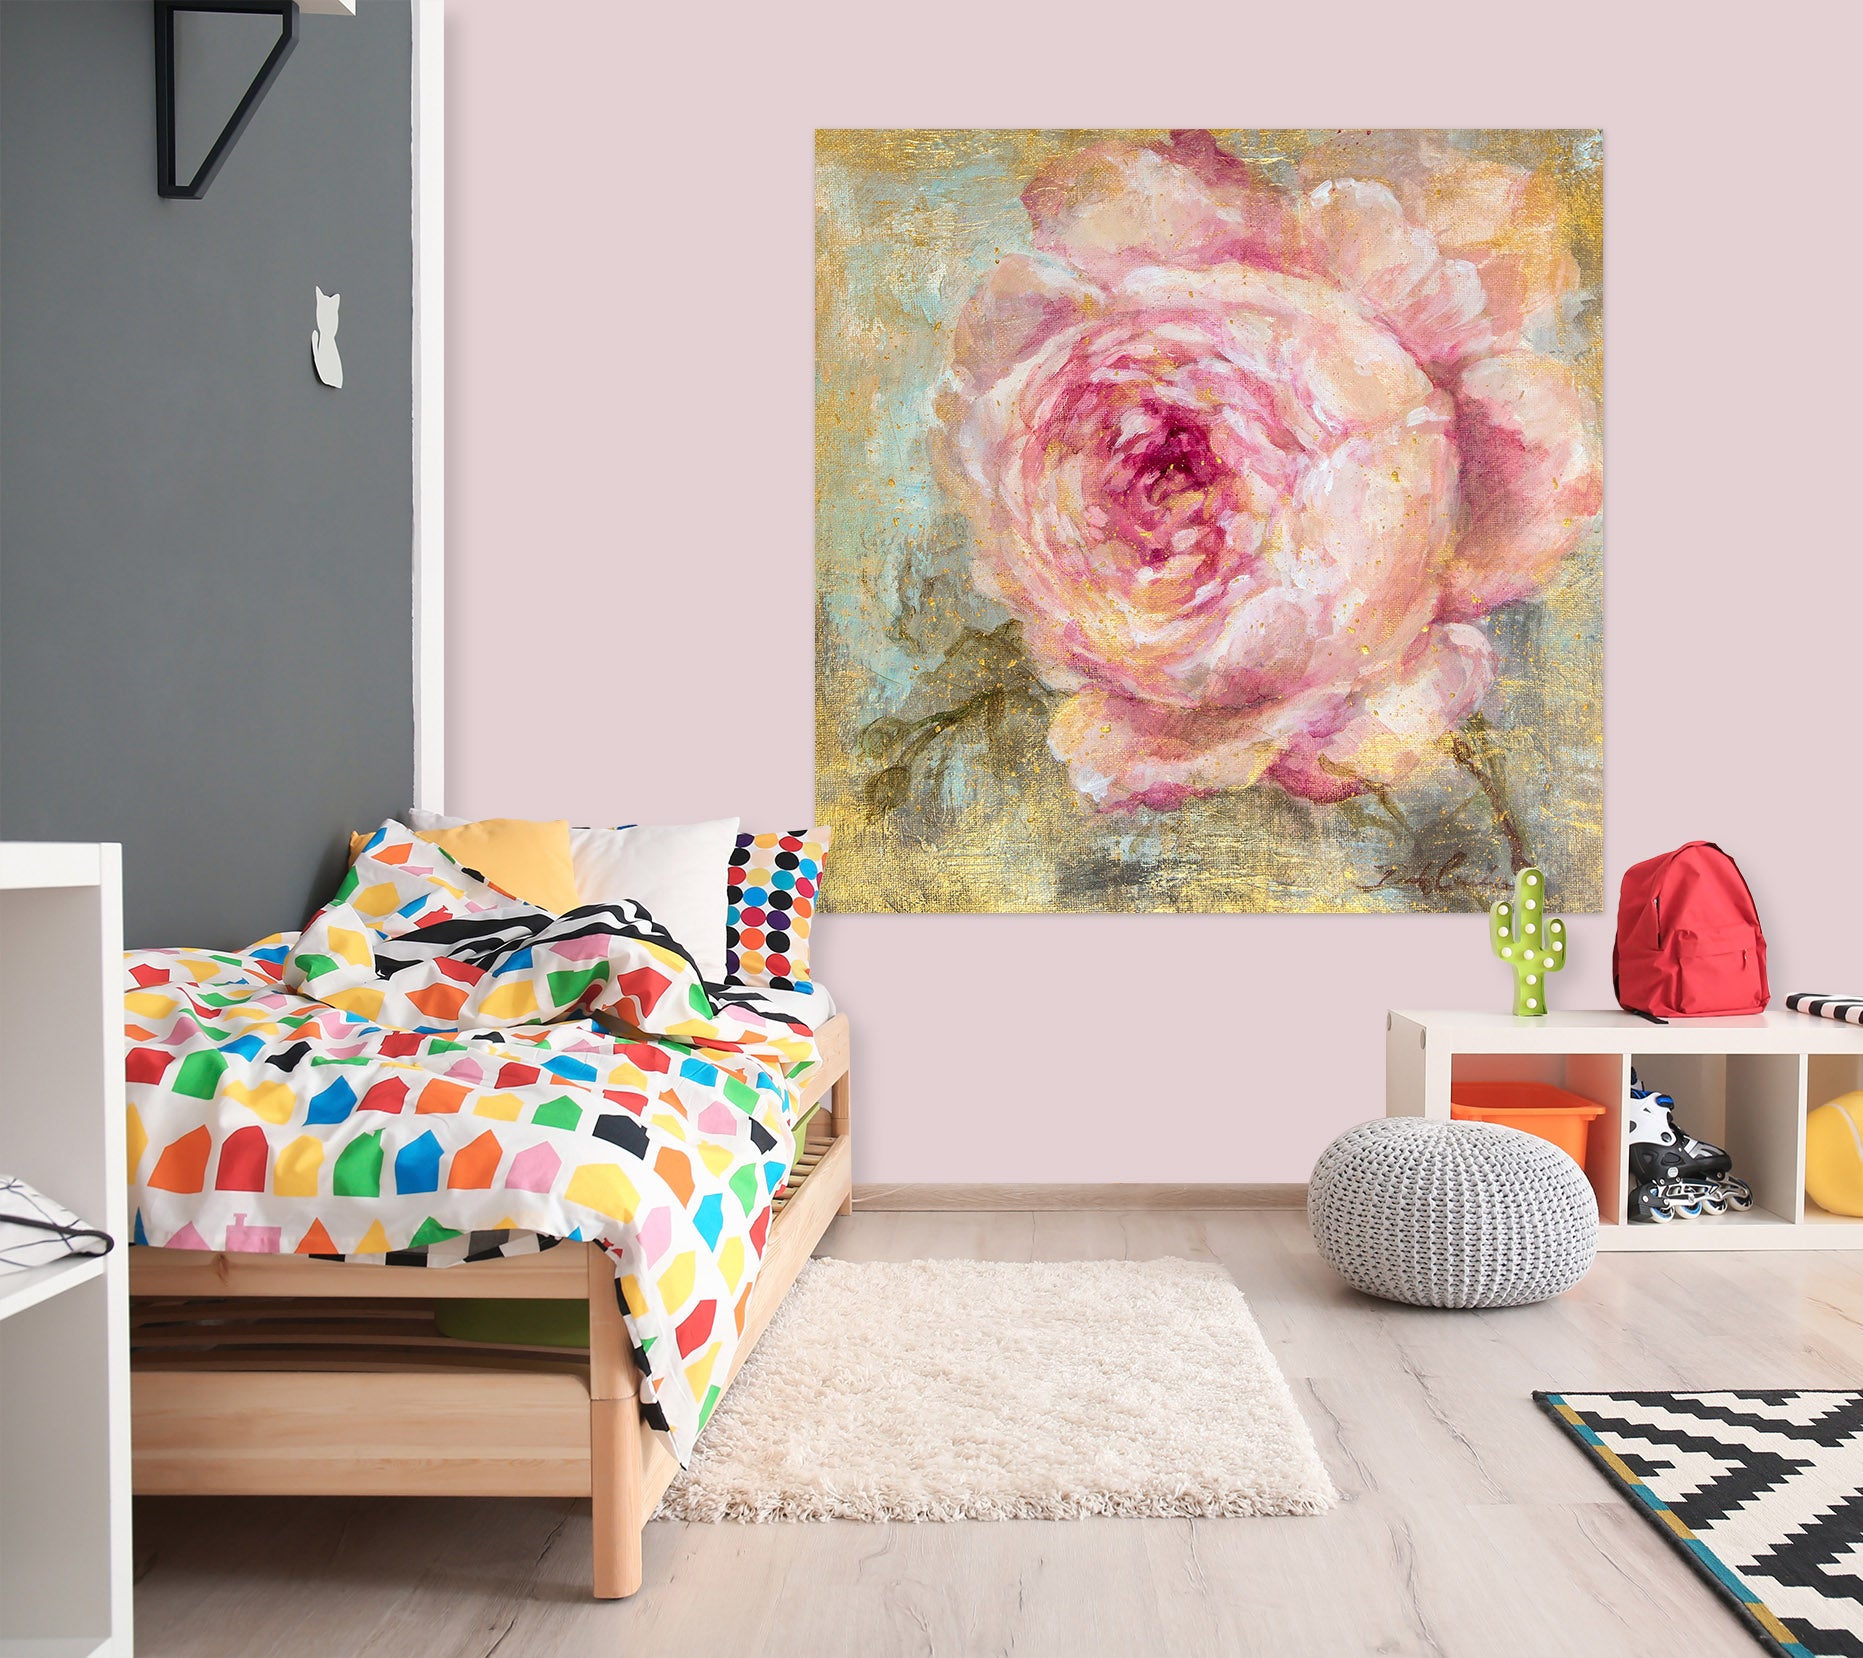 3D Pink Rose 087 Debi Coules Wall Sticker